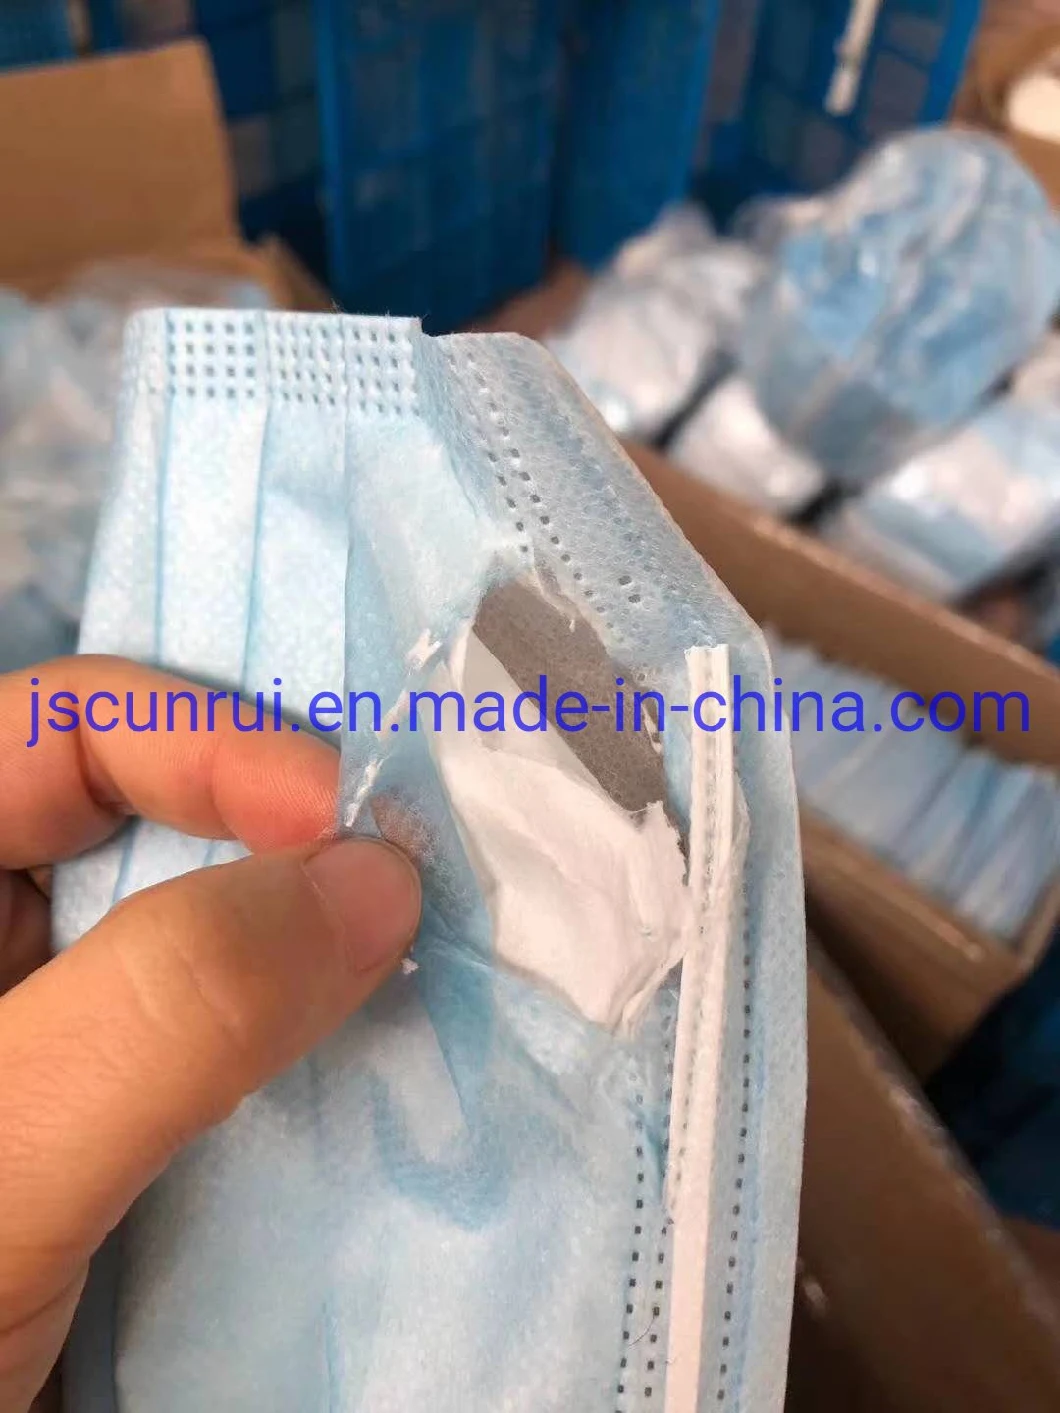 3 Ply Nonwoven Disposable Face Protection Disposal Mask Disposable Virus Face Mask